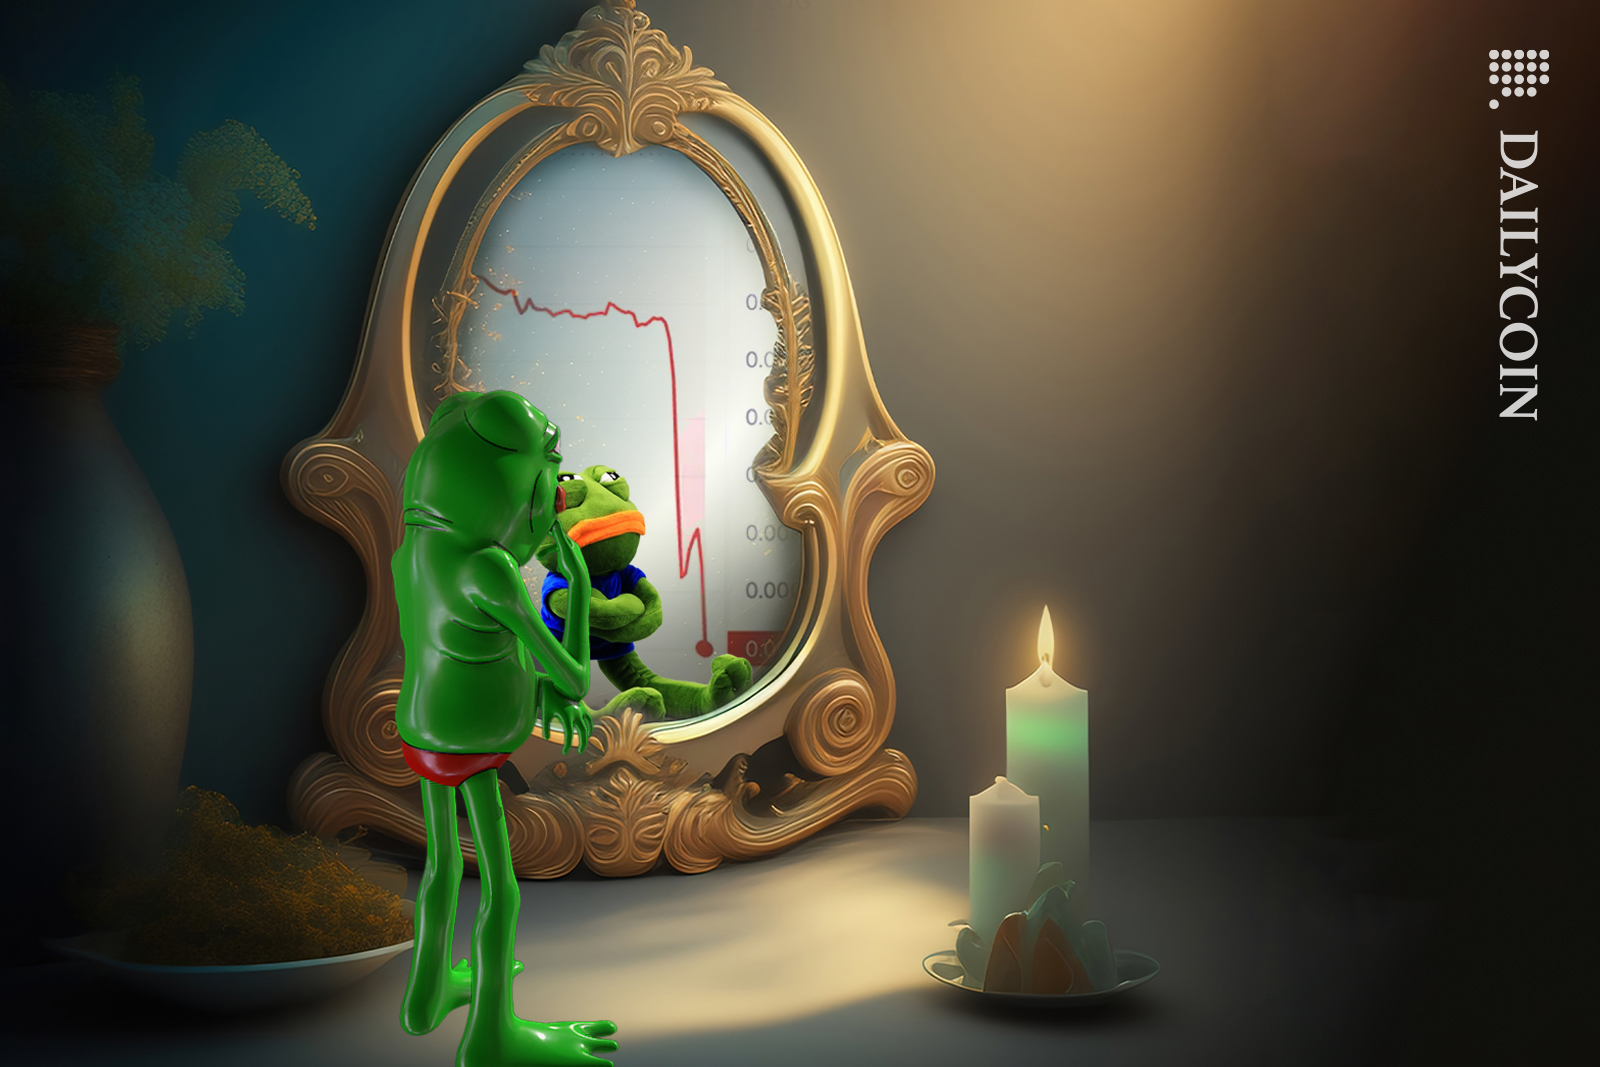 ''Mirror, mirror on the wall showing some bad news after all'' Pepe is thinking what to do next.